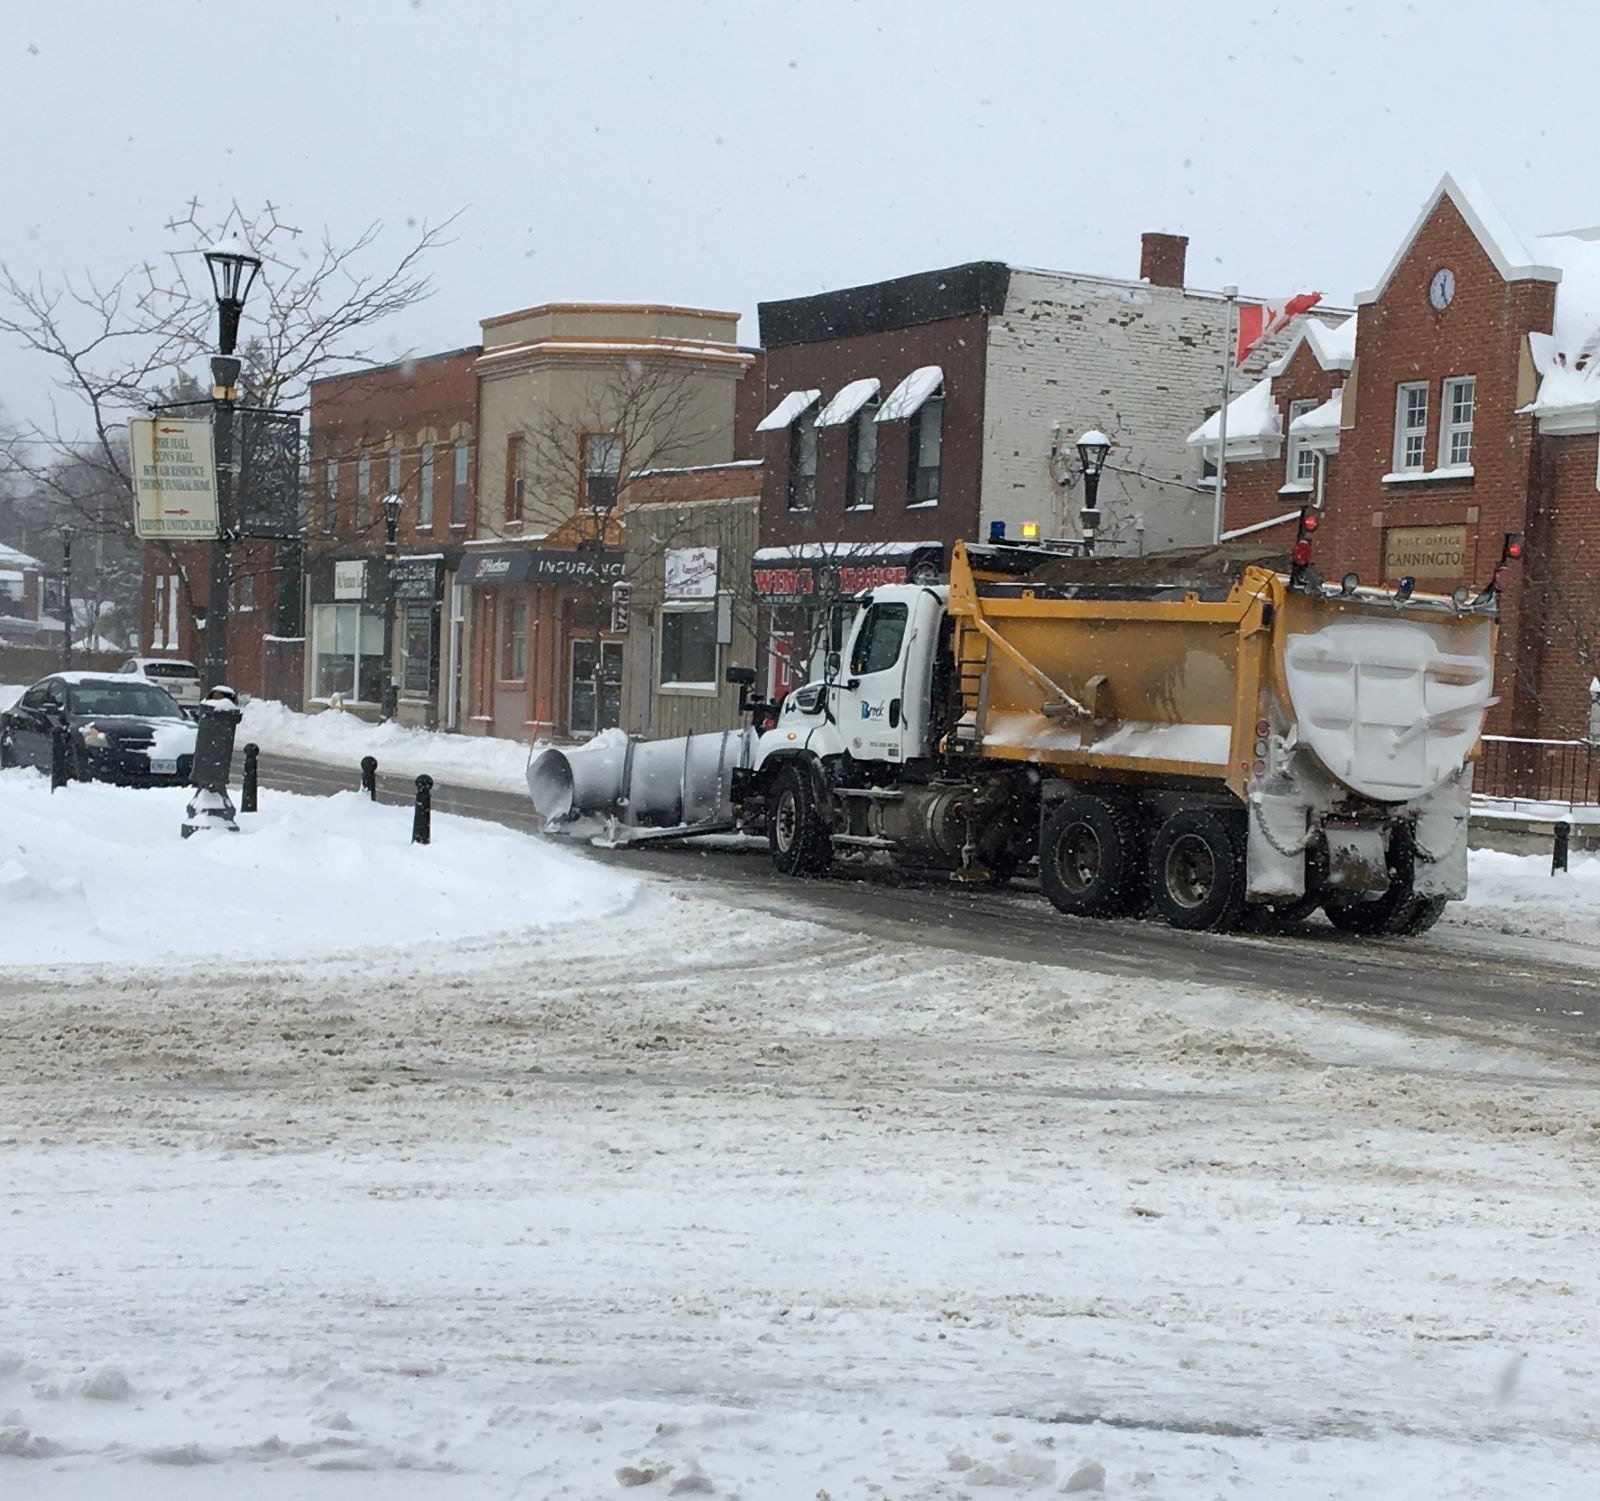 Township of Brock Snowplow clearing the main Street of Cannington